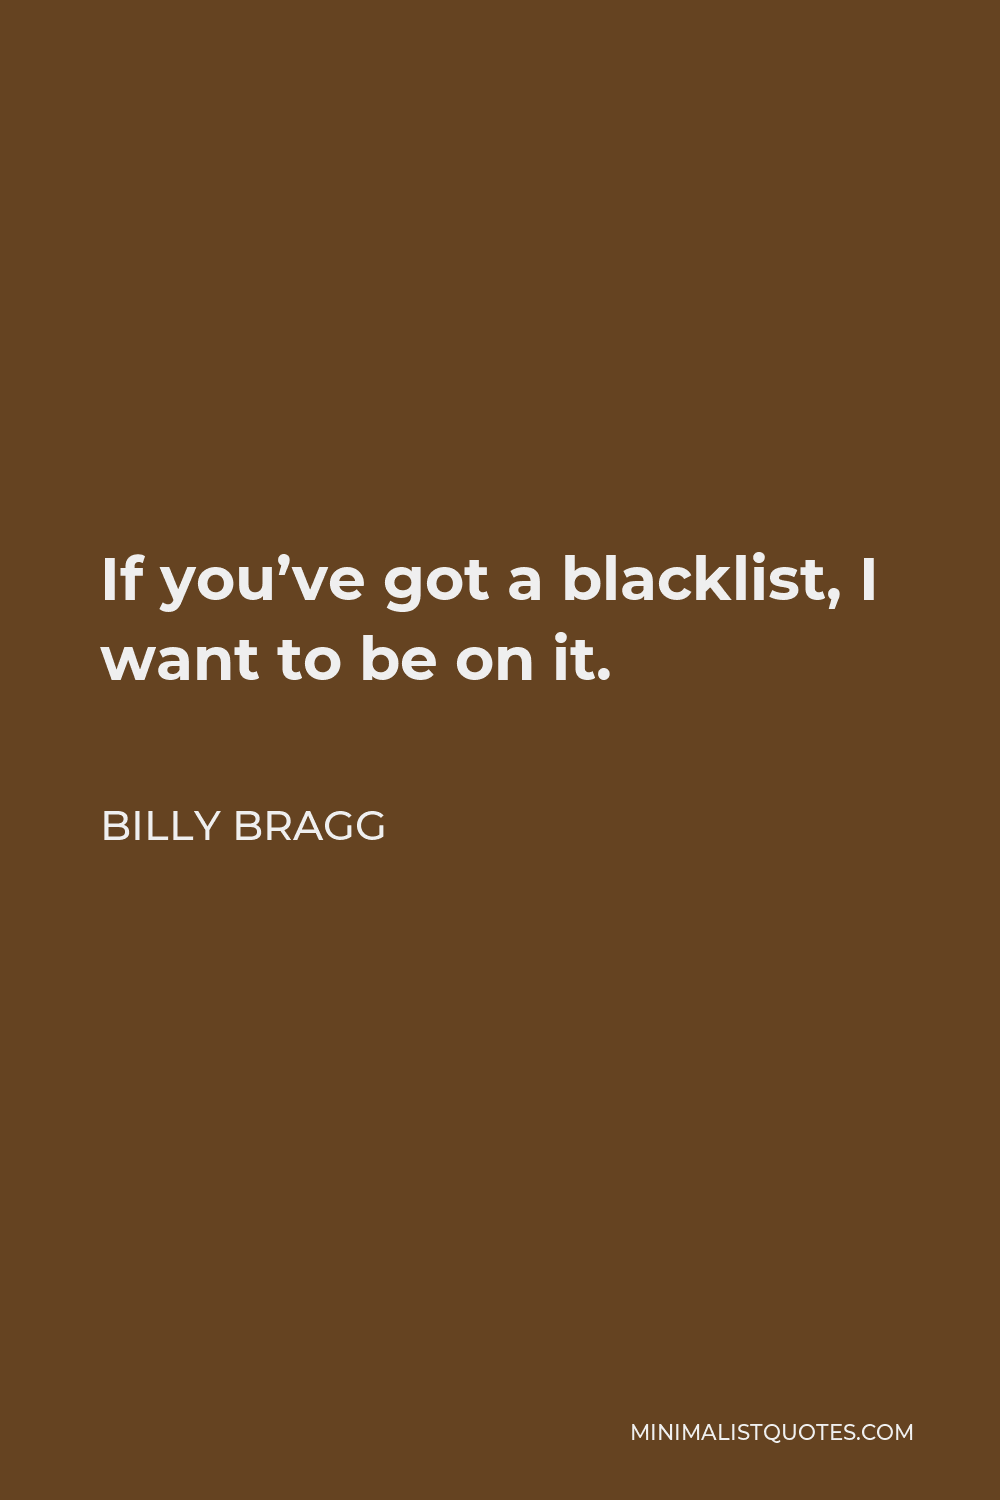 Billy Bragg Quote - If you’ve got a blacklist, I want to be on it.